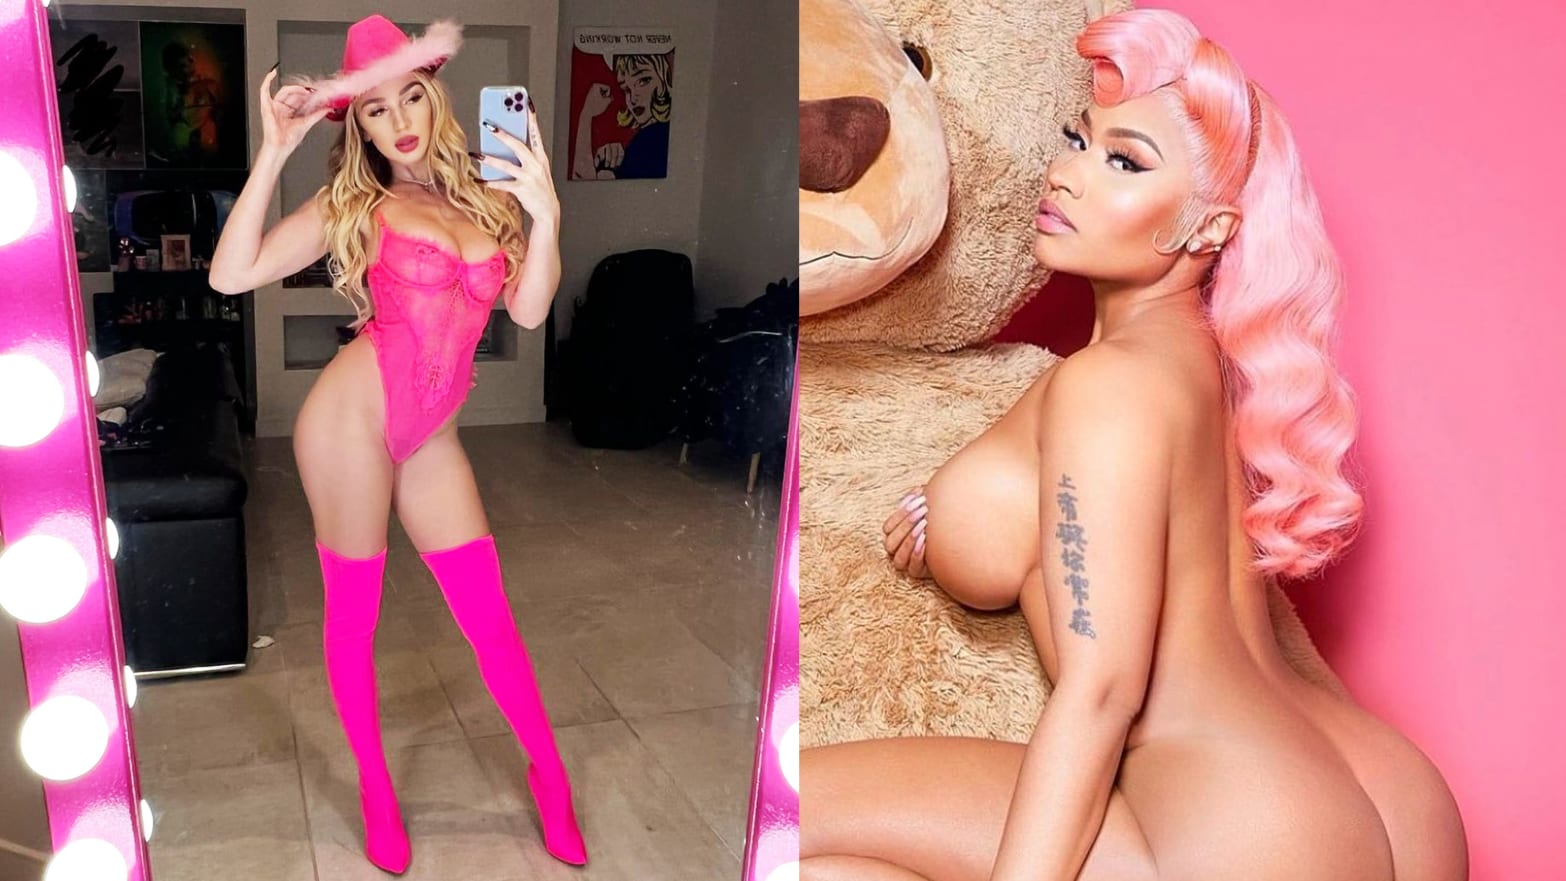 Real Homemade Porn With Nicki - Porn Star Kendra Sunderland Asks Why Nicki Minaj Can Get Naked on Instagram  and Porn Stars Can't